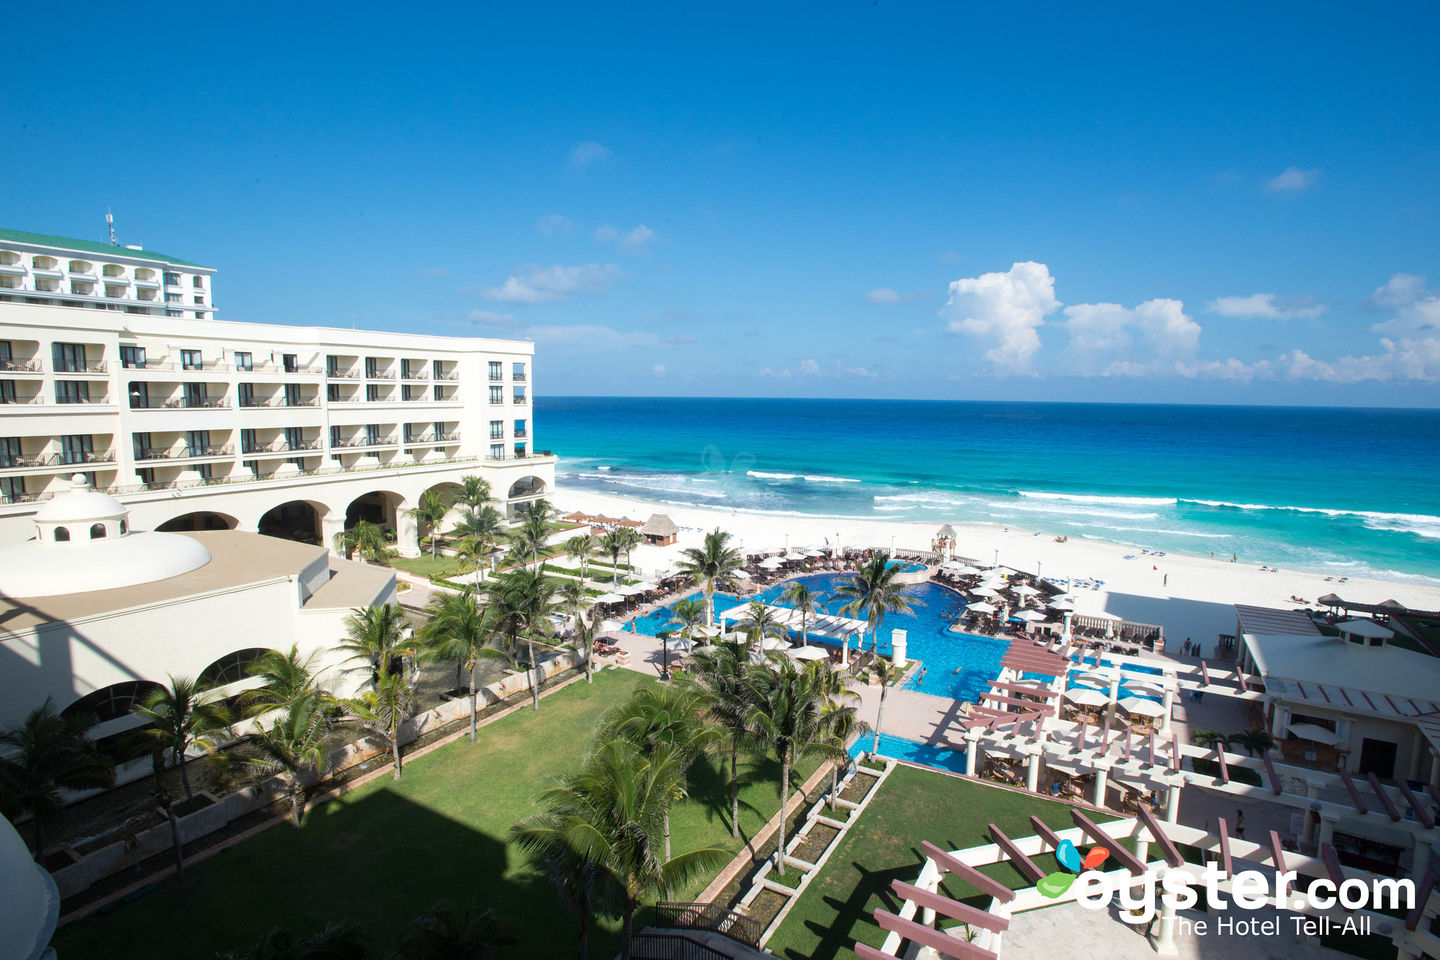 Marriott Cancun Resort Review: What To REALLY Expect If You Stay